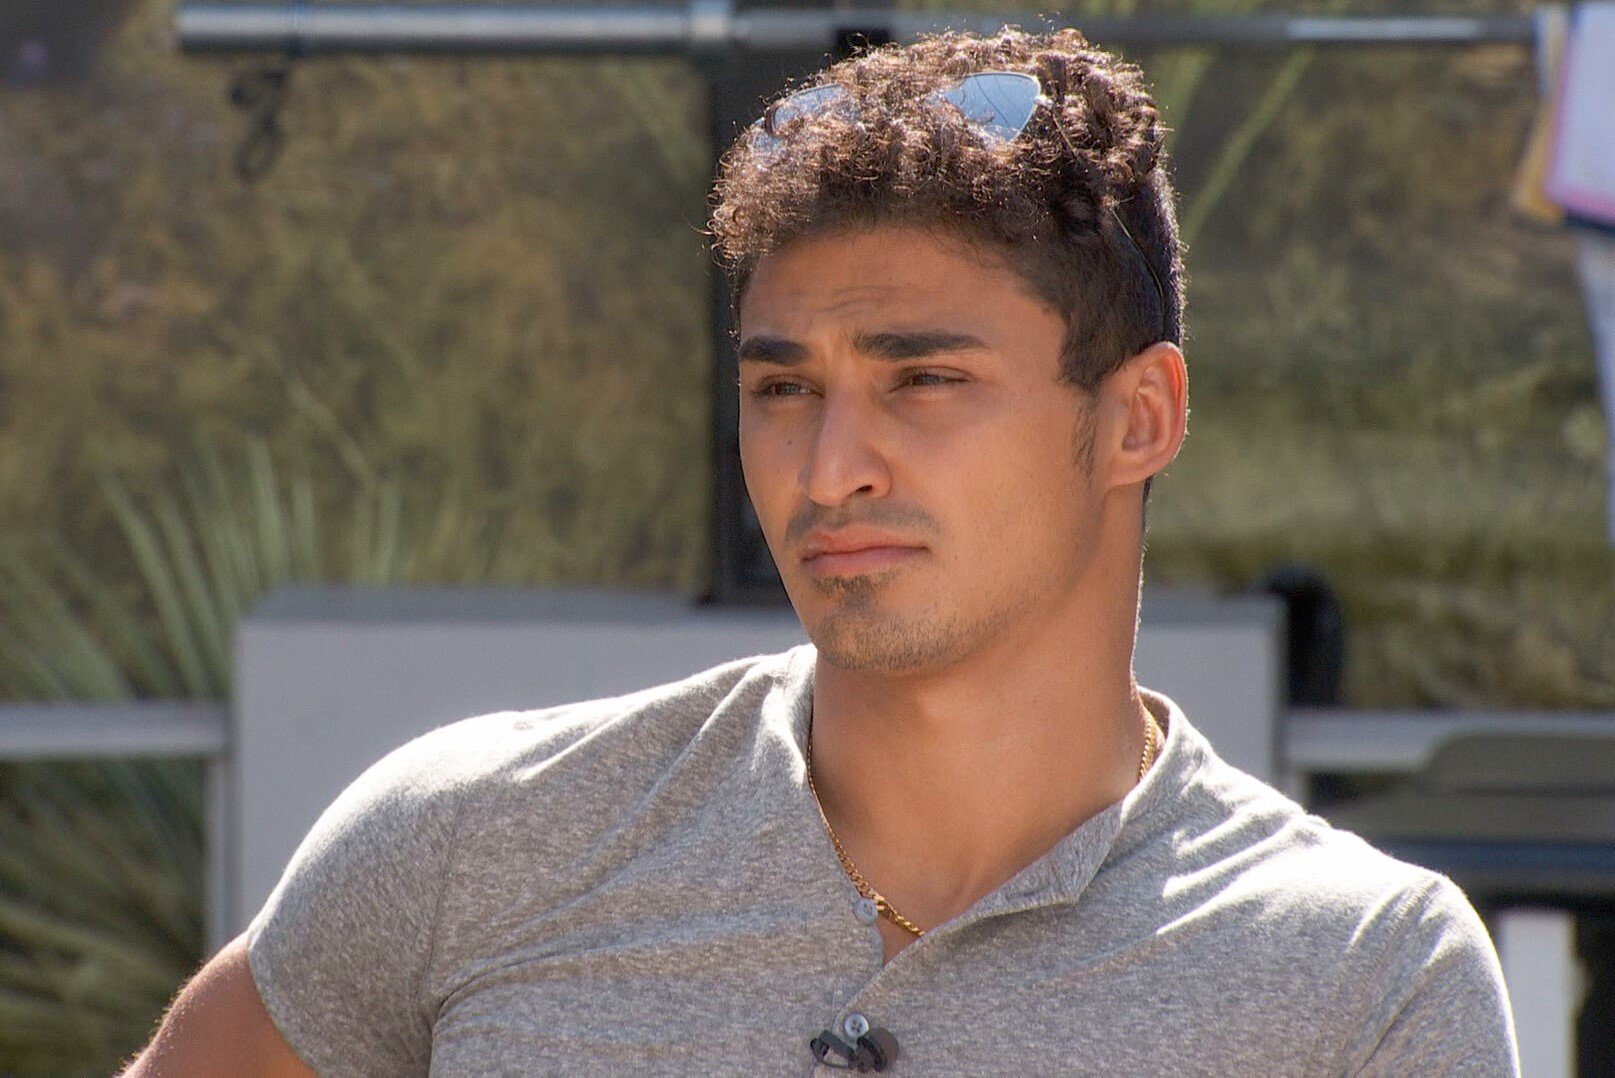 Joseph Abdin, who didn't win the Power of Veto during week seven of 'Big Brother 24,' wears a light gray shirt and sunglasses on his head.